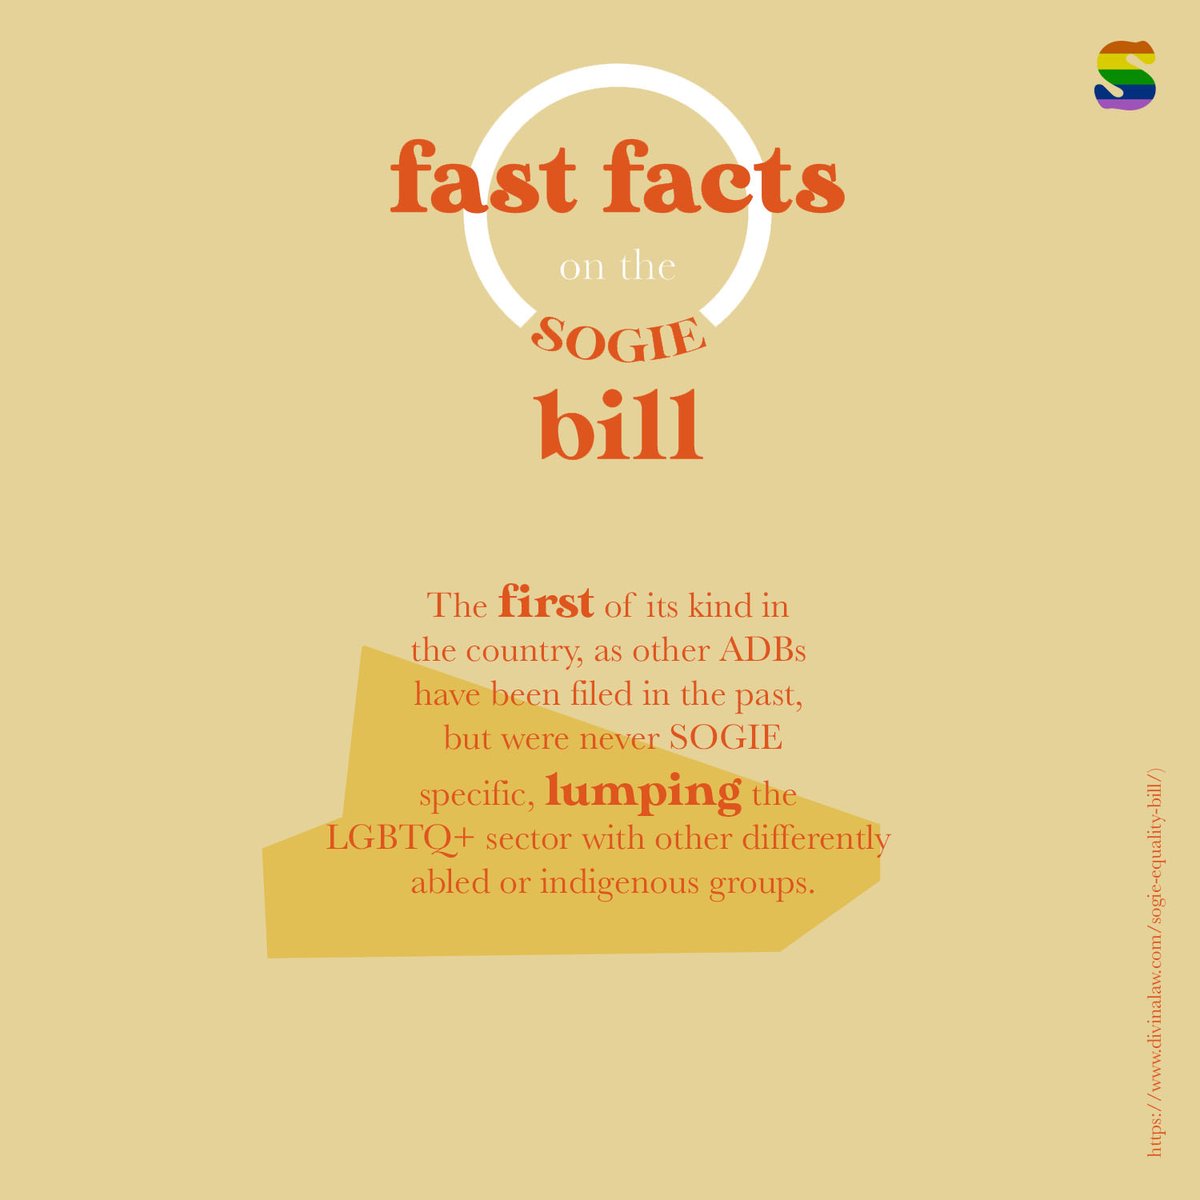 Here at Spectrum, we believe that every person has the right to not be discriminated against in school, in work, and in the community. Join us as we take a stand for LGBTQ+ rights in the PH. Check out this thread for some SOGIE bill fast facts! #SOGIEEqualityNow